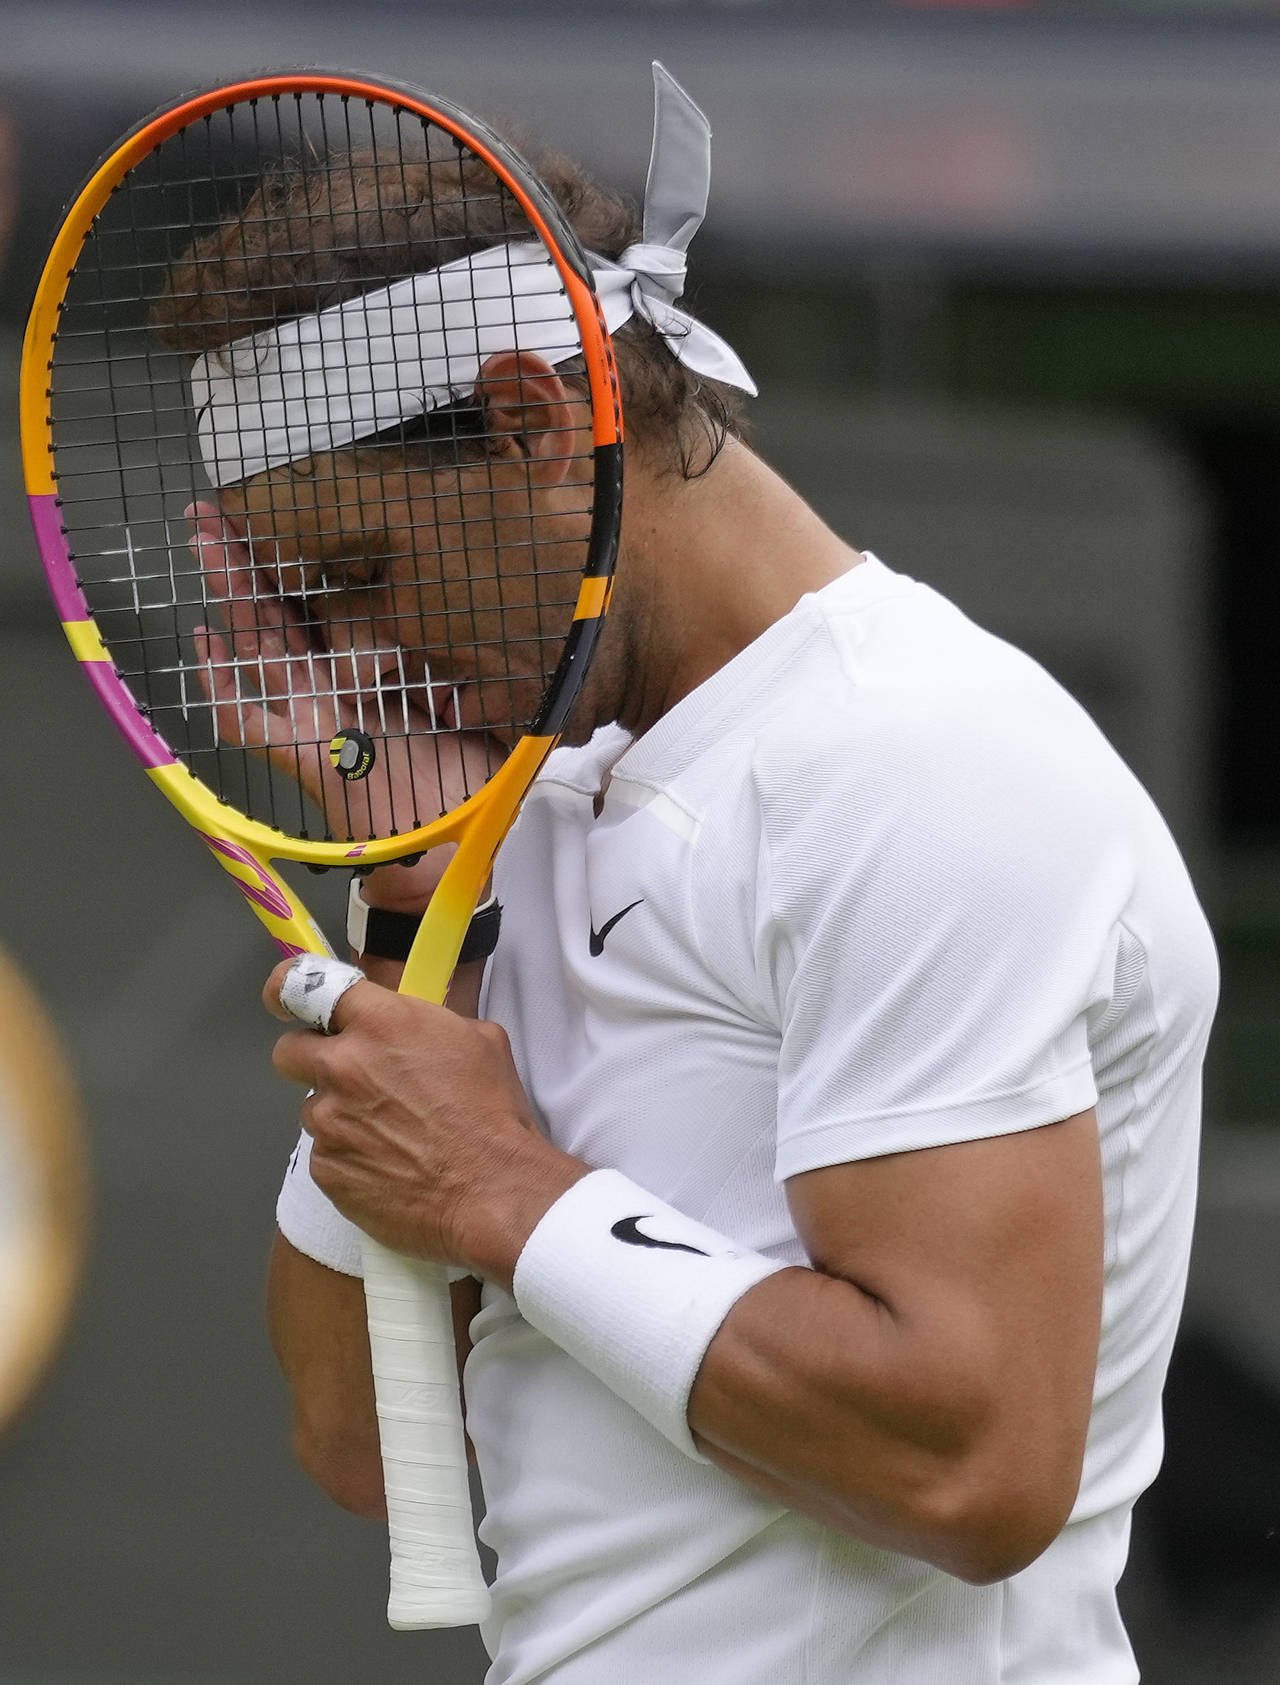 Spain's Rafael Nadal reacts after losing a point as he plays Taylor Fritz of the US in a men's sing...